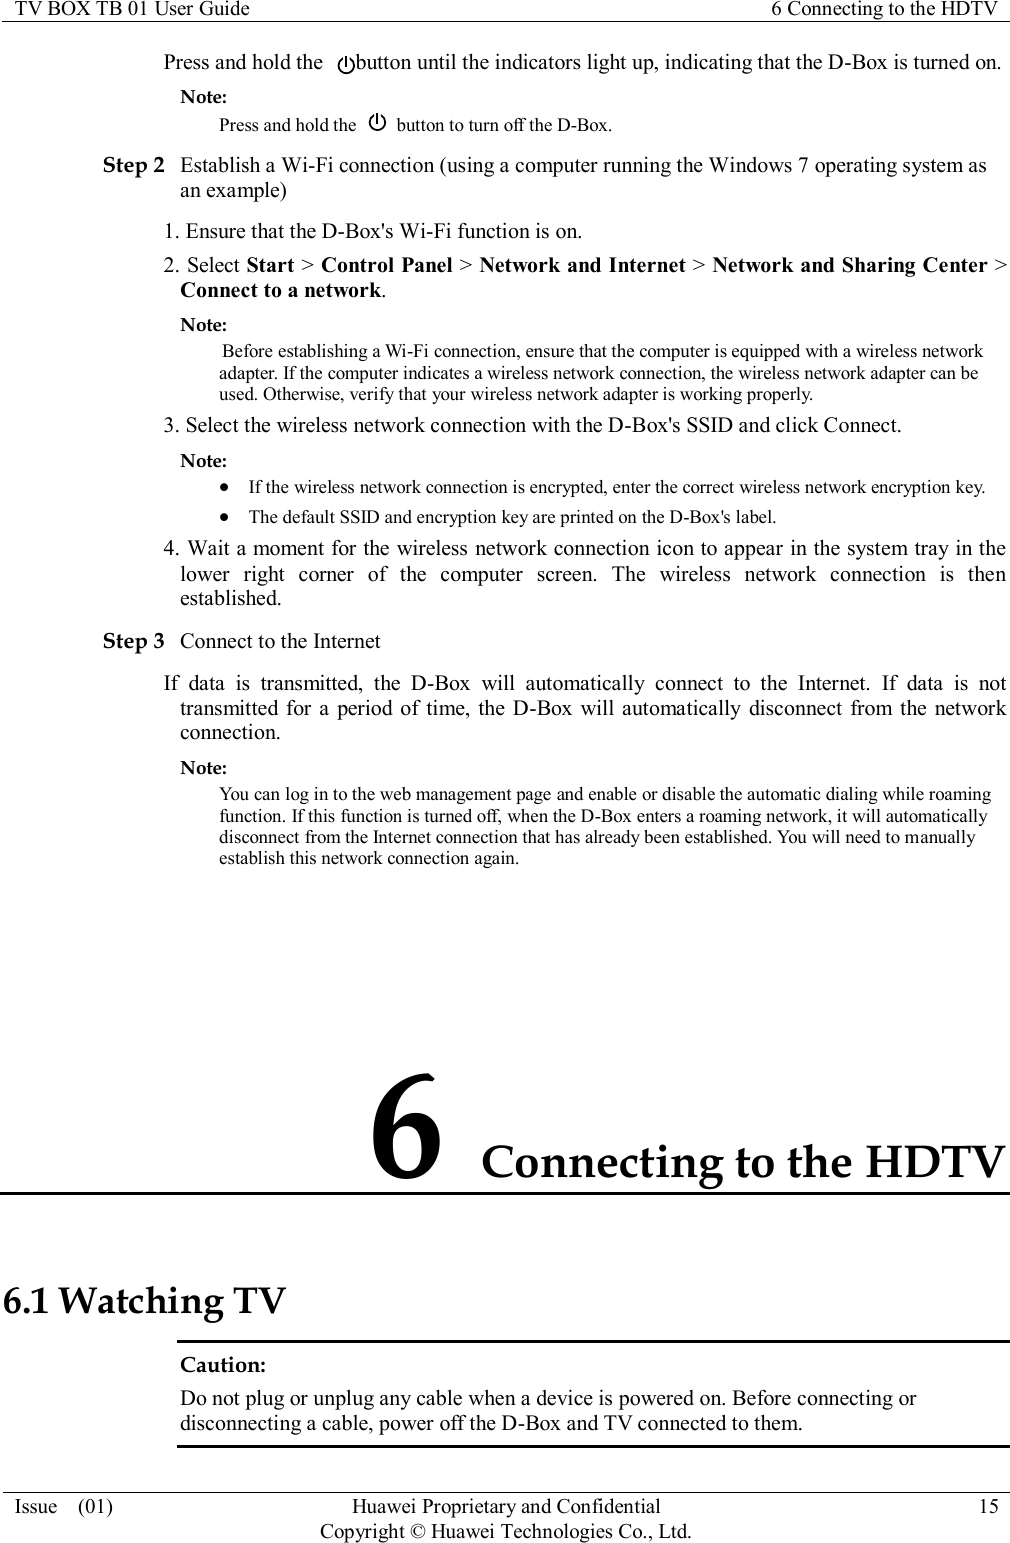 TV BOX TB 01 User Guide 6 Connecting to the HDTV  Issue    (01) Huawei Proprietary and Confidential                                     Copyright © Huawei Technologies Co., Ltd. 15  Press and hold the  button until the indicators light up, indicating that the D-Box is turned on. Note: Press and hold the    button to turn off the D-Box. Step 2 Establish a Wi-Fi connection (using a computer running the Windows 7 operating system as an example) 1. Ensure that the D-Box&apos;s Wi-Fi function is on. 2. Select Start &gt; Control Panel &gt; Network and Internet &gt; Network and Sharing Center &gt; Connect to a network. Note:  Before establishing a Wi-Fi connection, ensure that the computer is equipped with a wireless network adapter. If the computer indicates a wireless network connection, the wireless network adapter can be used. Otherwise, verify that your wireless network adapter is working properly. 3. Select the wireless network connection with the D-Box&apos;s SSID and click Connect. Note:  If the wireless network connection is encrypted, enter the correct wireless network encryption key.  The default SSID and encryption key are printed on the D-Box&apos;s label. 4. Wait a moment for the wireless network connection icon to appear in the system tray in the lower  right  corner  of  the  computer  screen.  The  wireless  network  connection  is  then established. Step 3 Connect to the Internet If  data  is  transmitted,  the  D-Box  will  automatically  connect  to  the  Internet.  If  data  is  not transmitted for a period of time, the D-Box will automatically  disconnect from the  network connection. Note: You can log in to the web management page and enable or disable the automatic dialing while roaming function. If this function is turned off, when the D-Box enters a roaming network, it will automatically disconnect from the Internet connection that has already been established. You will need to manually establish this network connection again. 6 Connecting to the HDTV 6.1 Watching TV Caution:   Do not plug or unplug any cable when a device is powered on. Before connecting or disconnecting a cable, power off the D-Box and TV connected to them. 